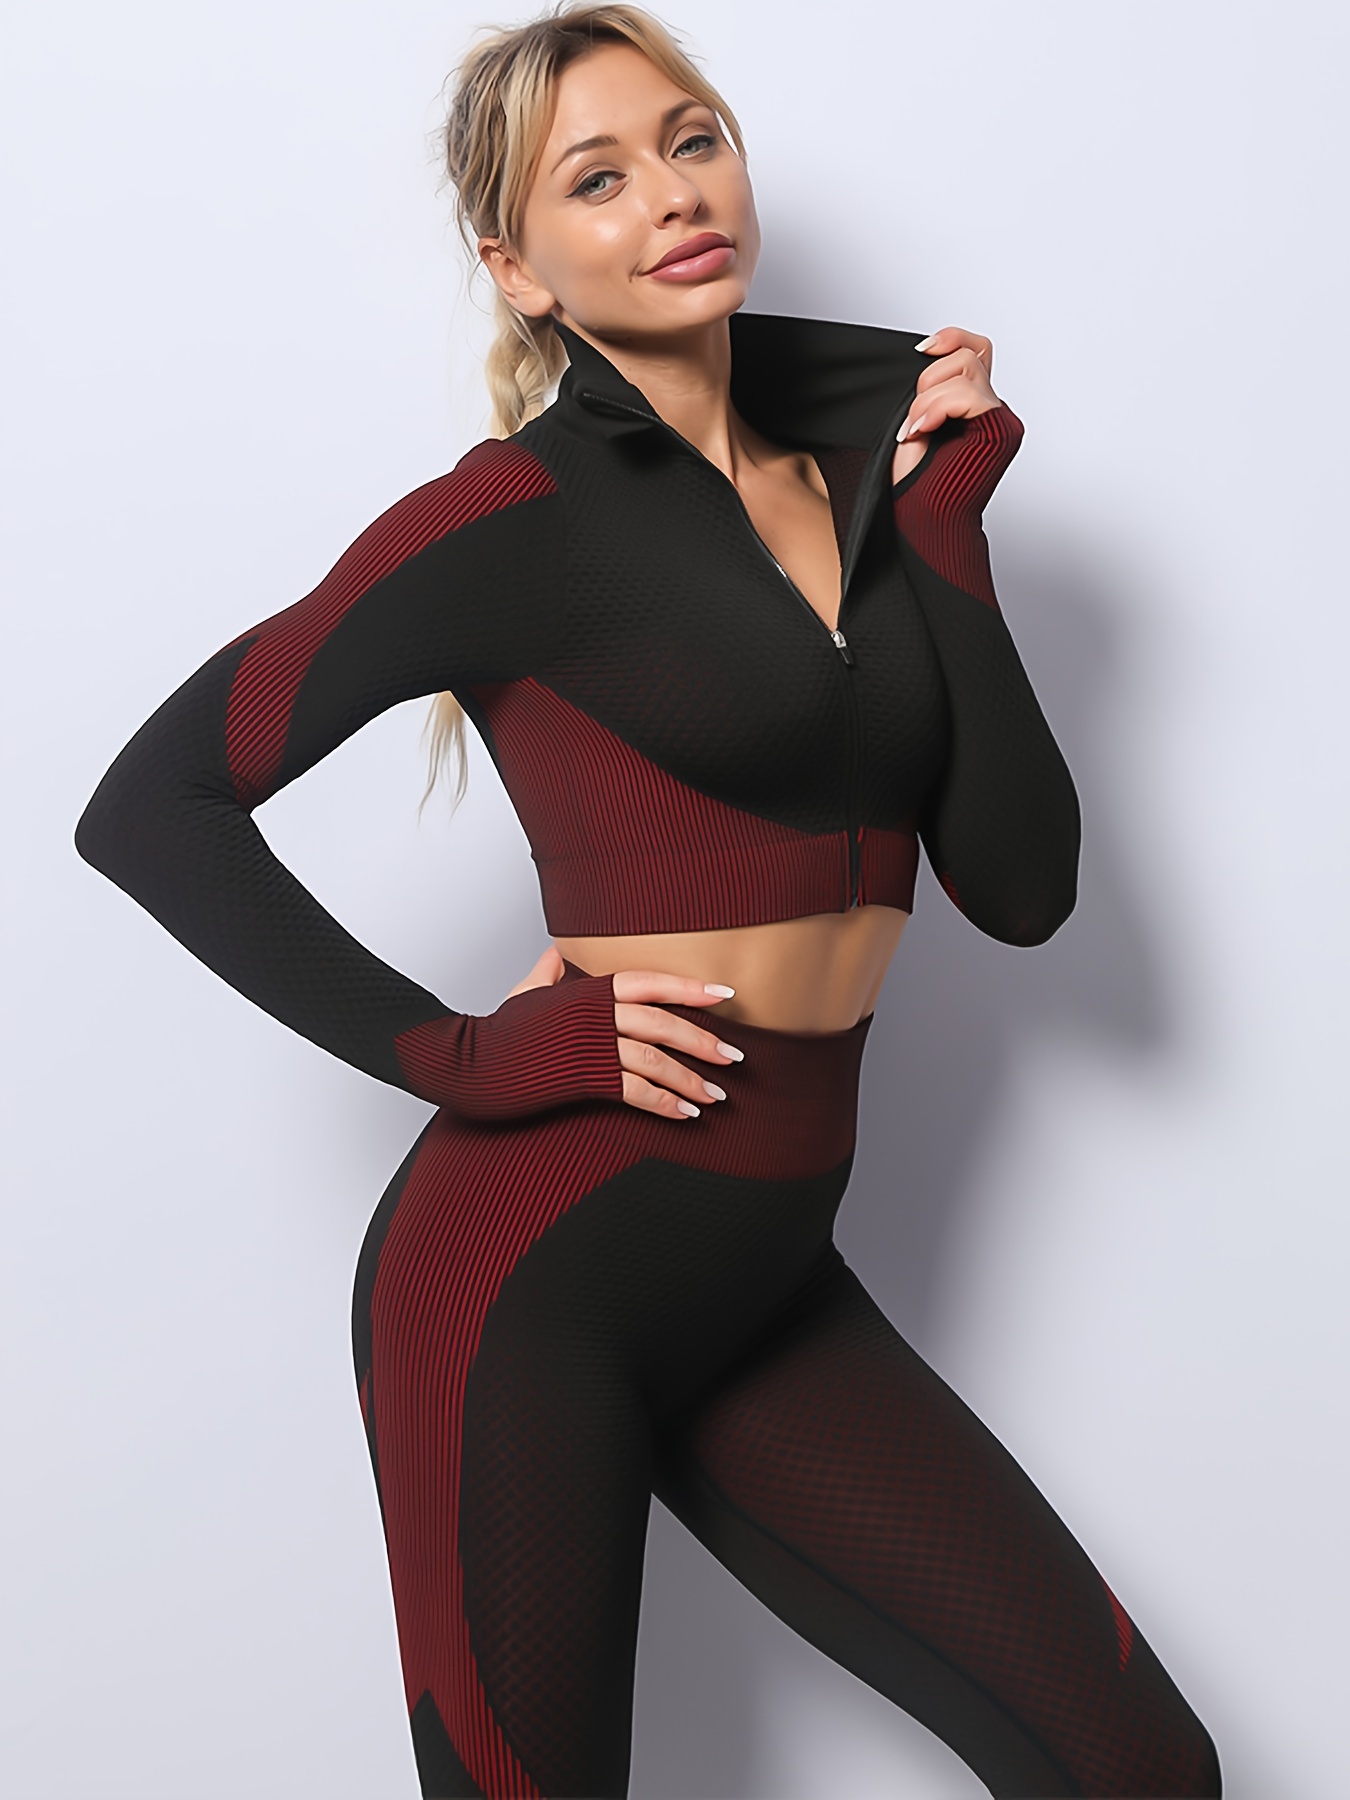 Women's 3 Piece Seamless Leggings, Sports Bra & Jacket - Available in 6  Colors